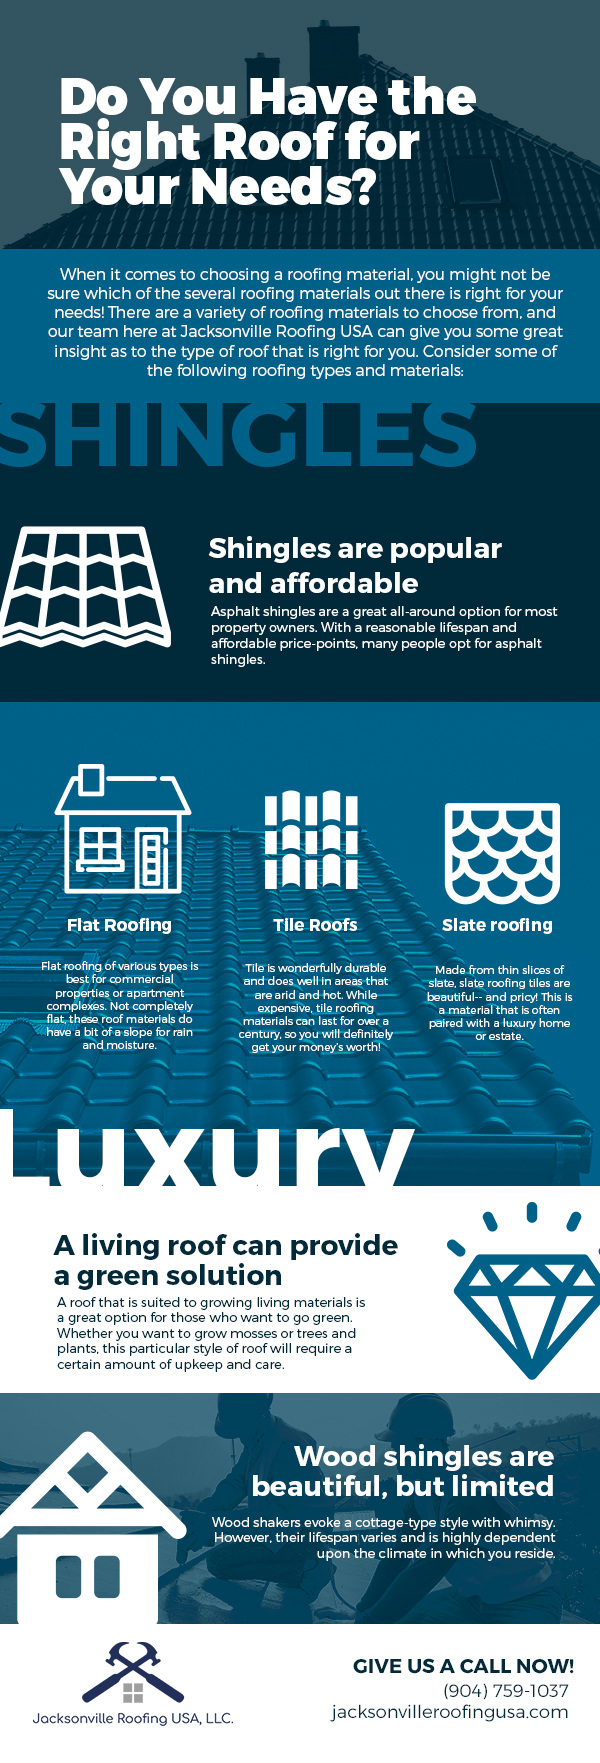 Do You Have the Right Roof for Your Needs? [infographic]